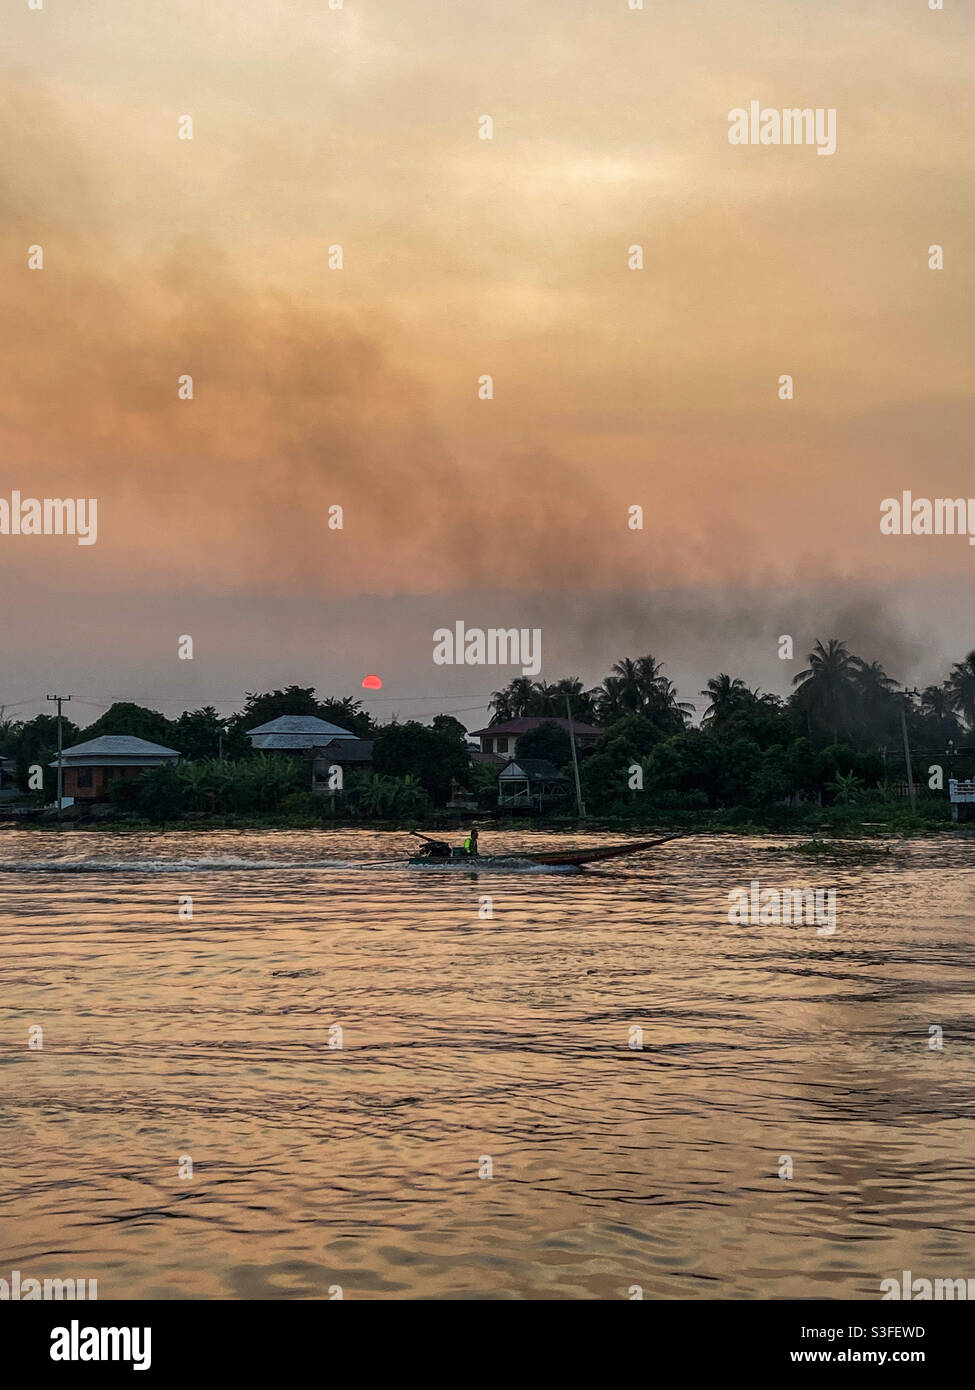 Smoke pollution coming from a boat on a river in Southeast Asia at sunset. Stock Photo